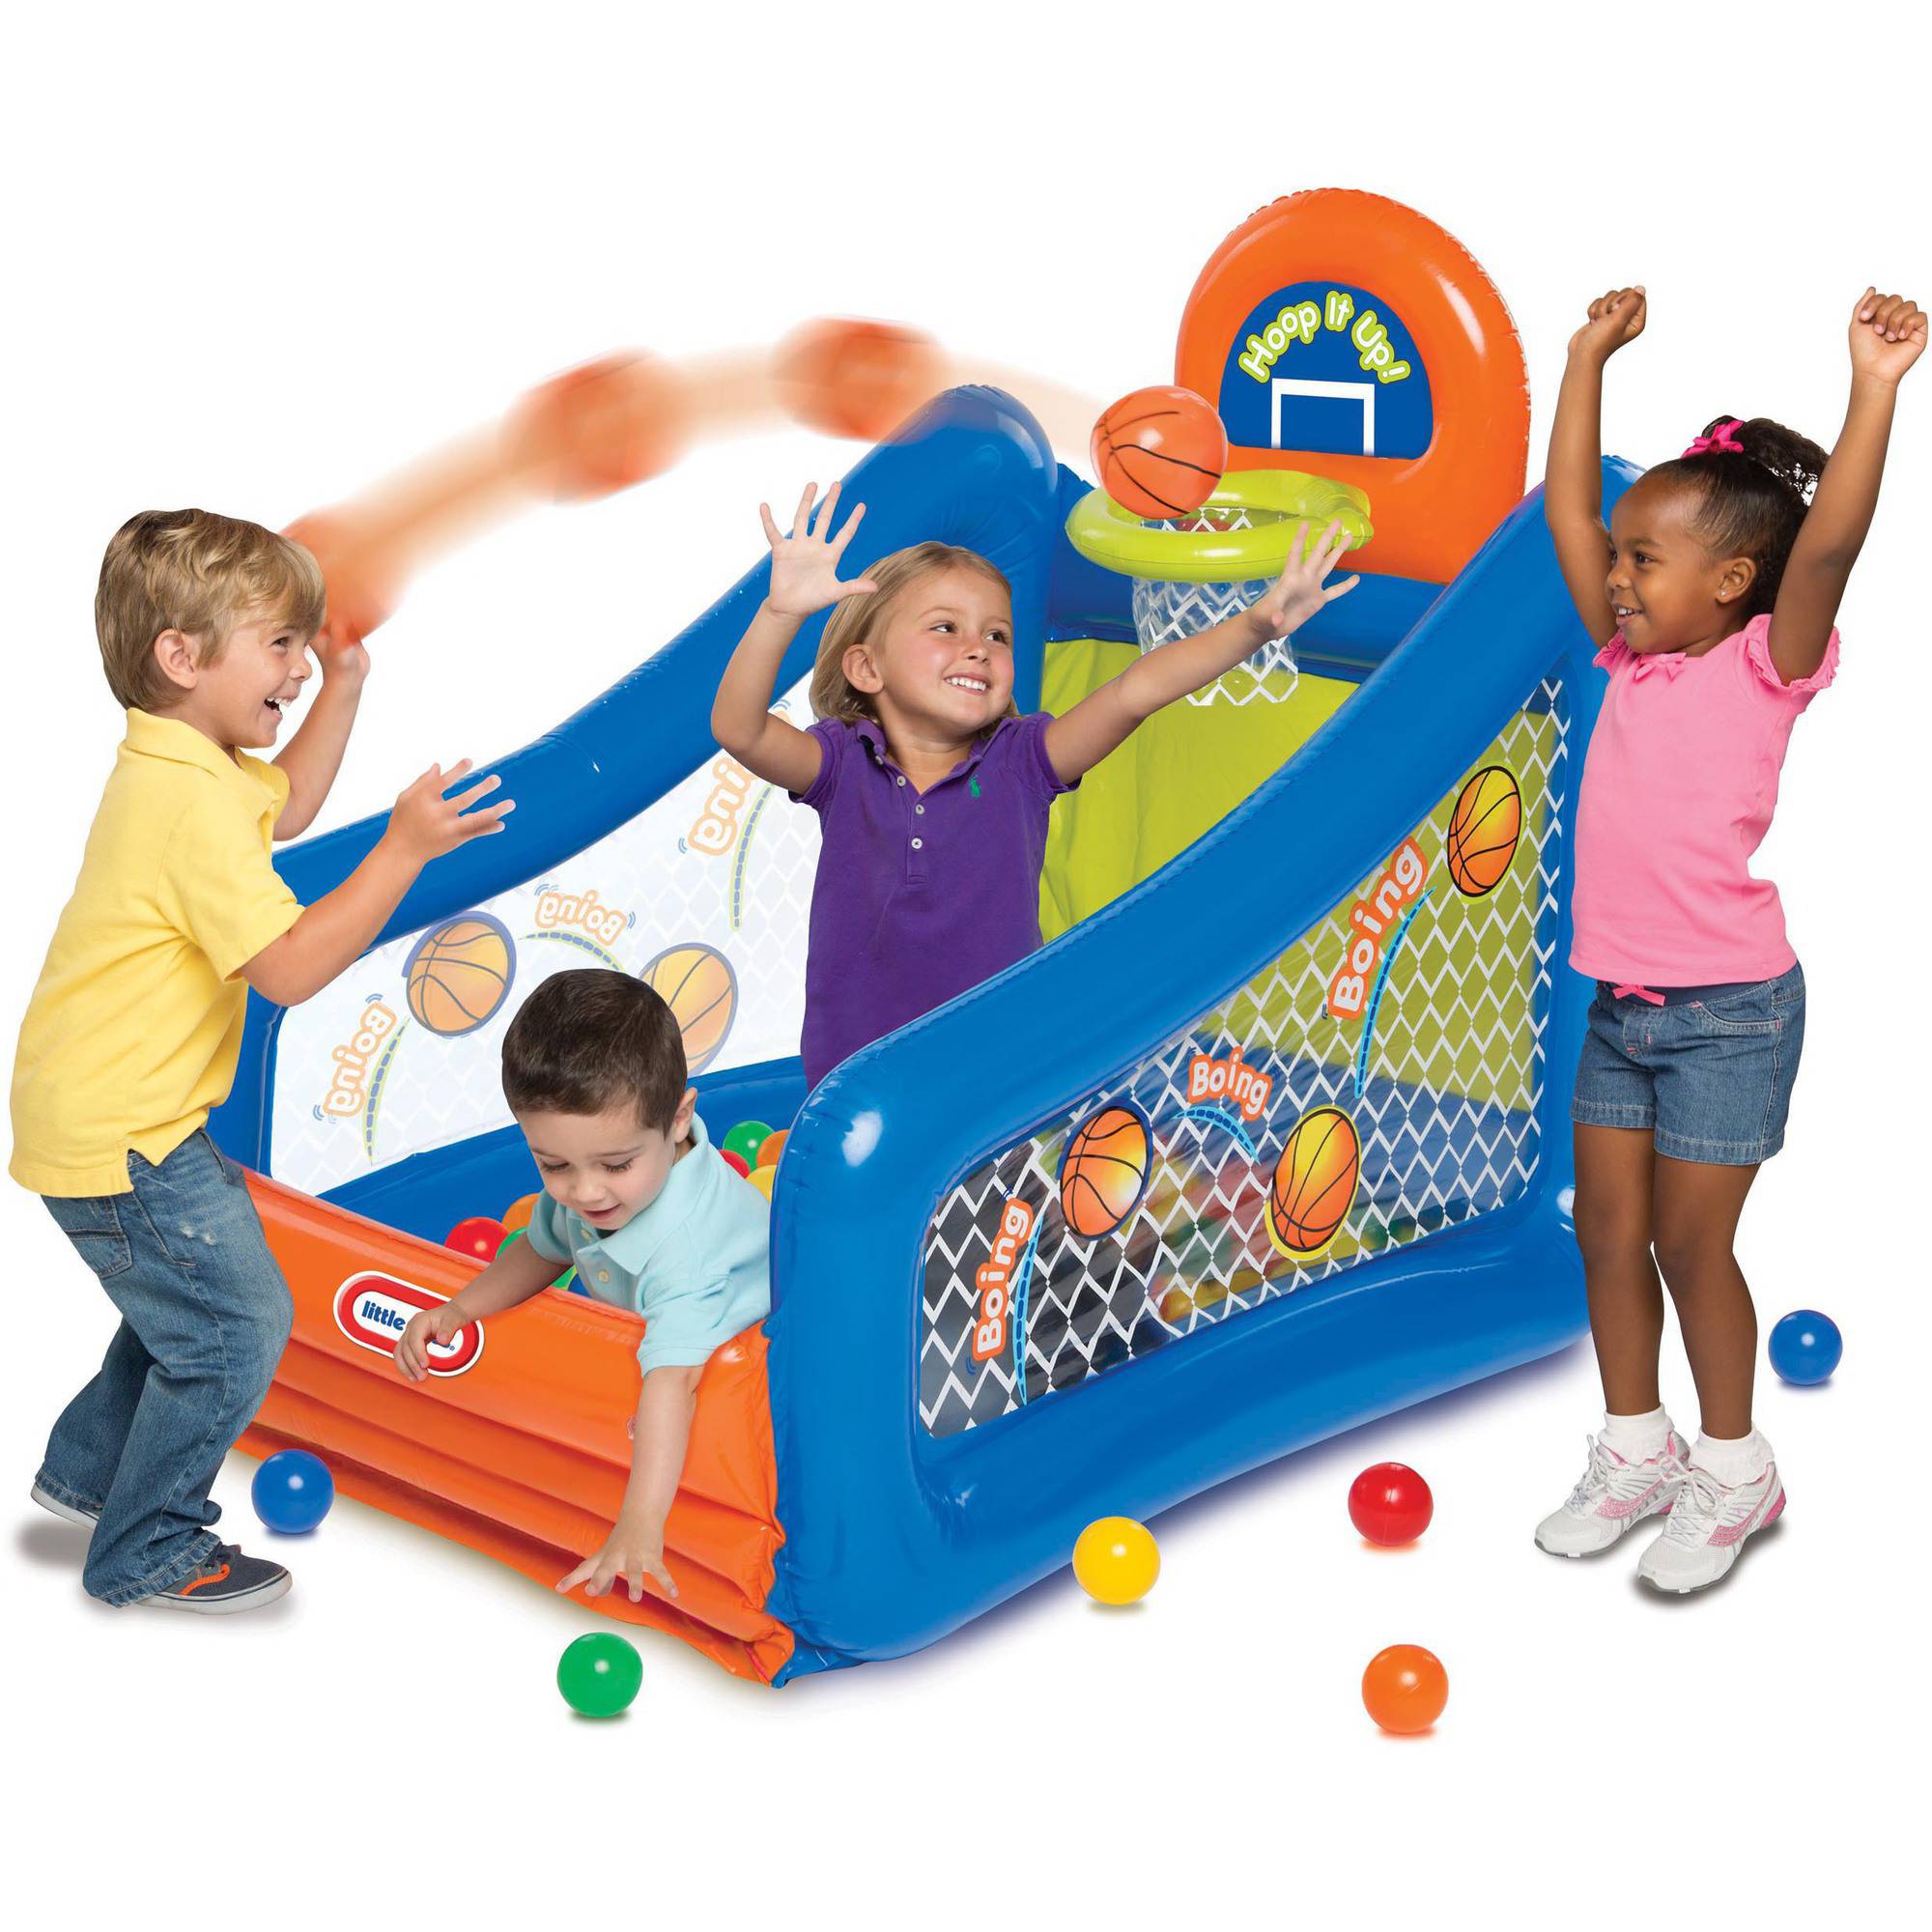 Little Tikes Hoop It Up! Play Center Ball Pit, Kids Ages 3 and up - image 1 of 3